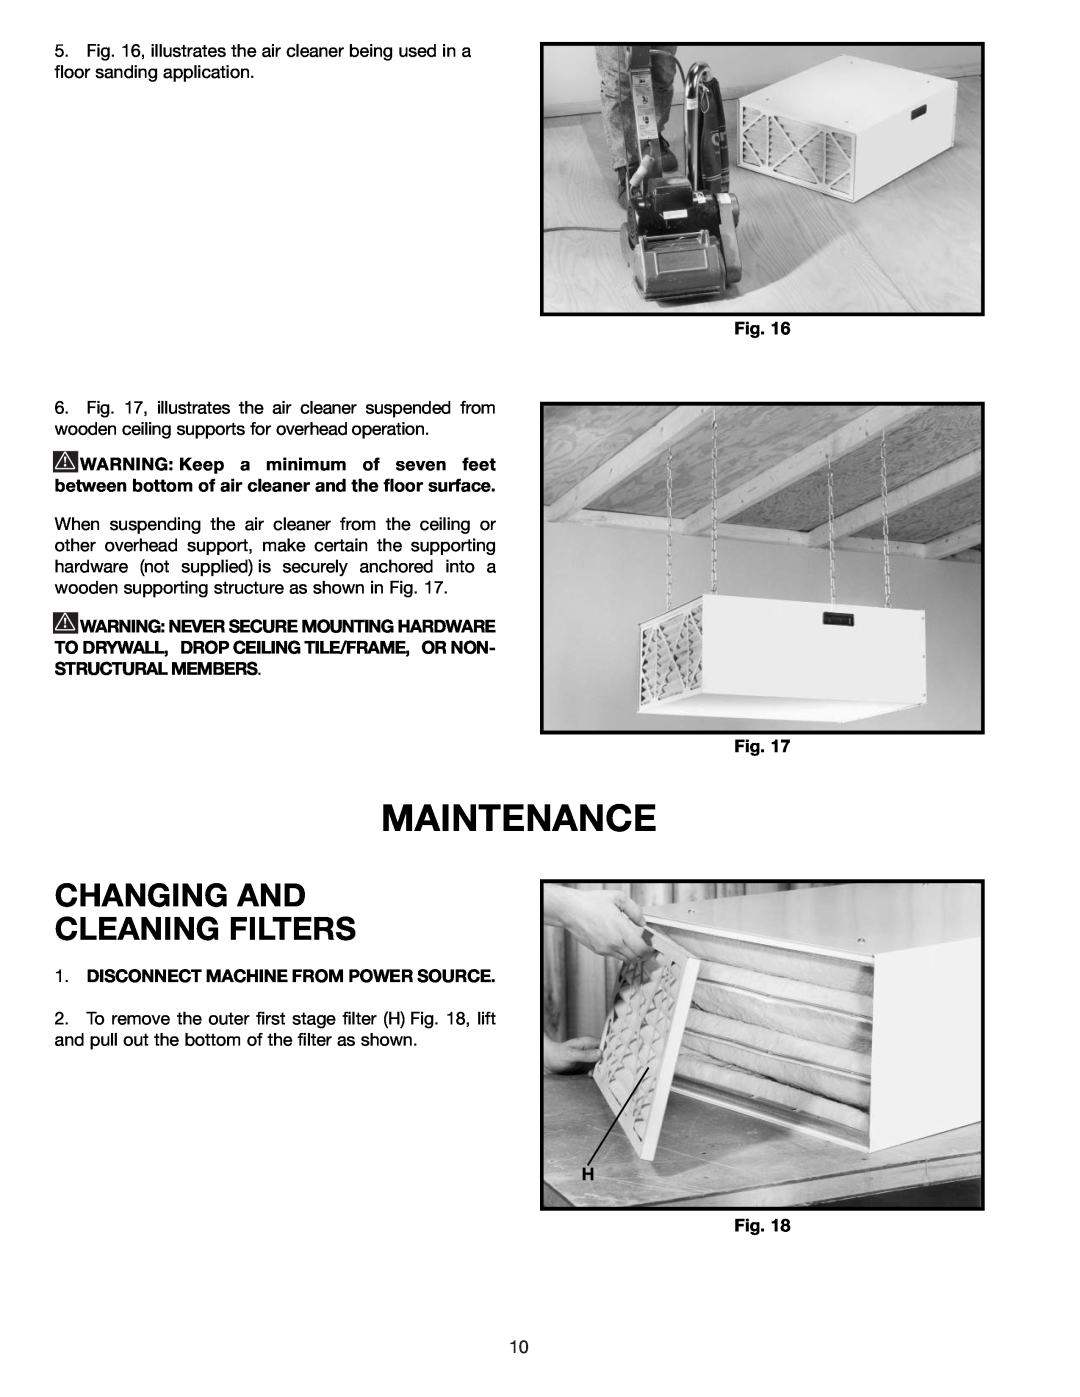 Delta AP200 instruction manual Maintenance, Changing And Cleaning Filters 